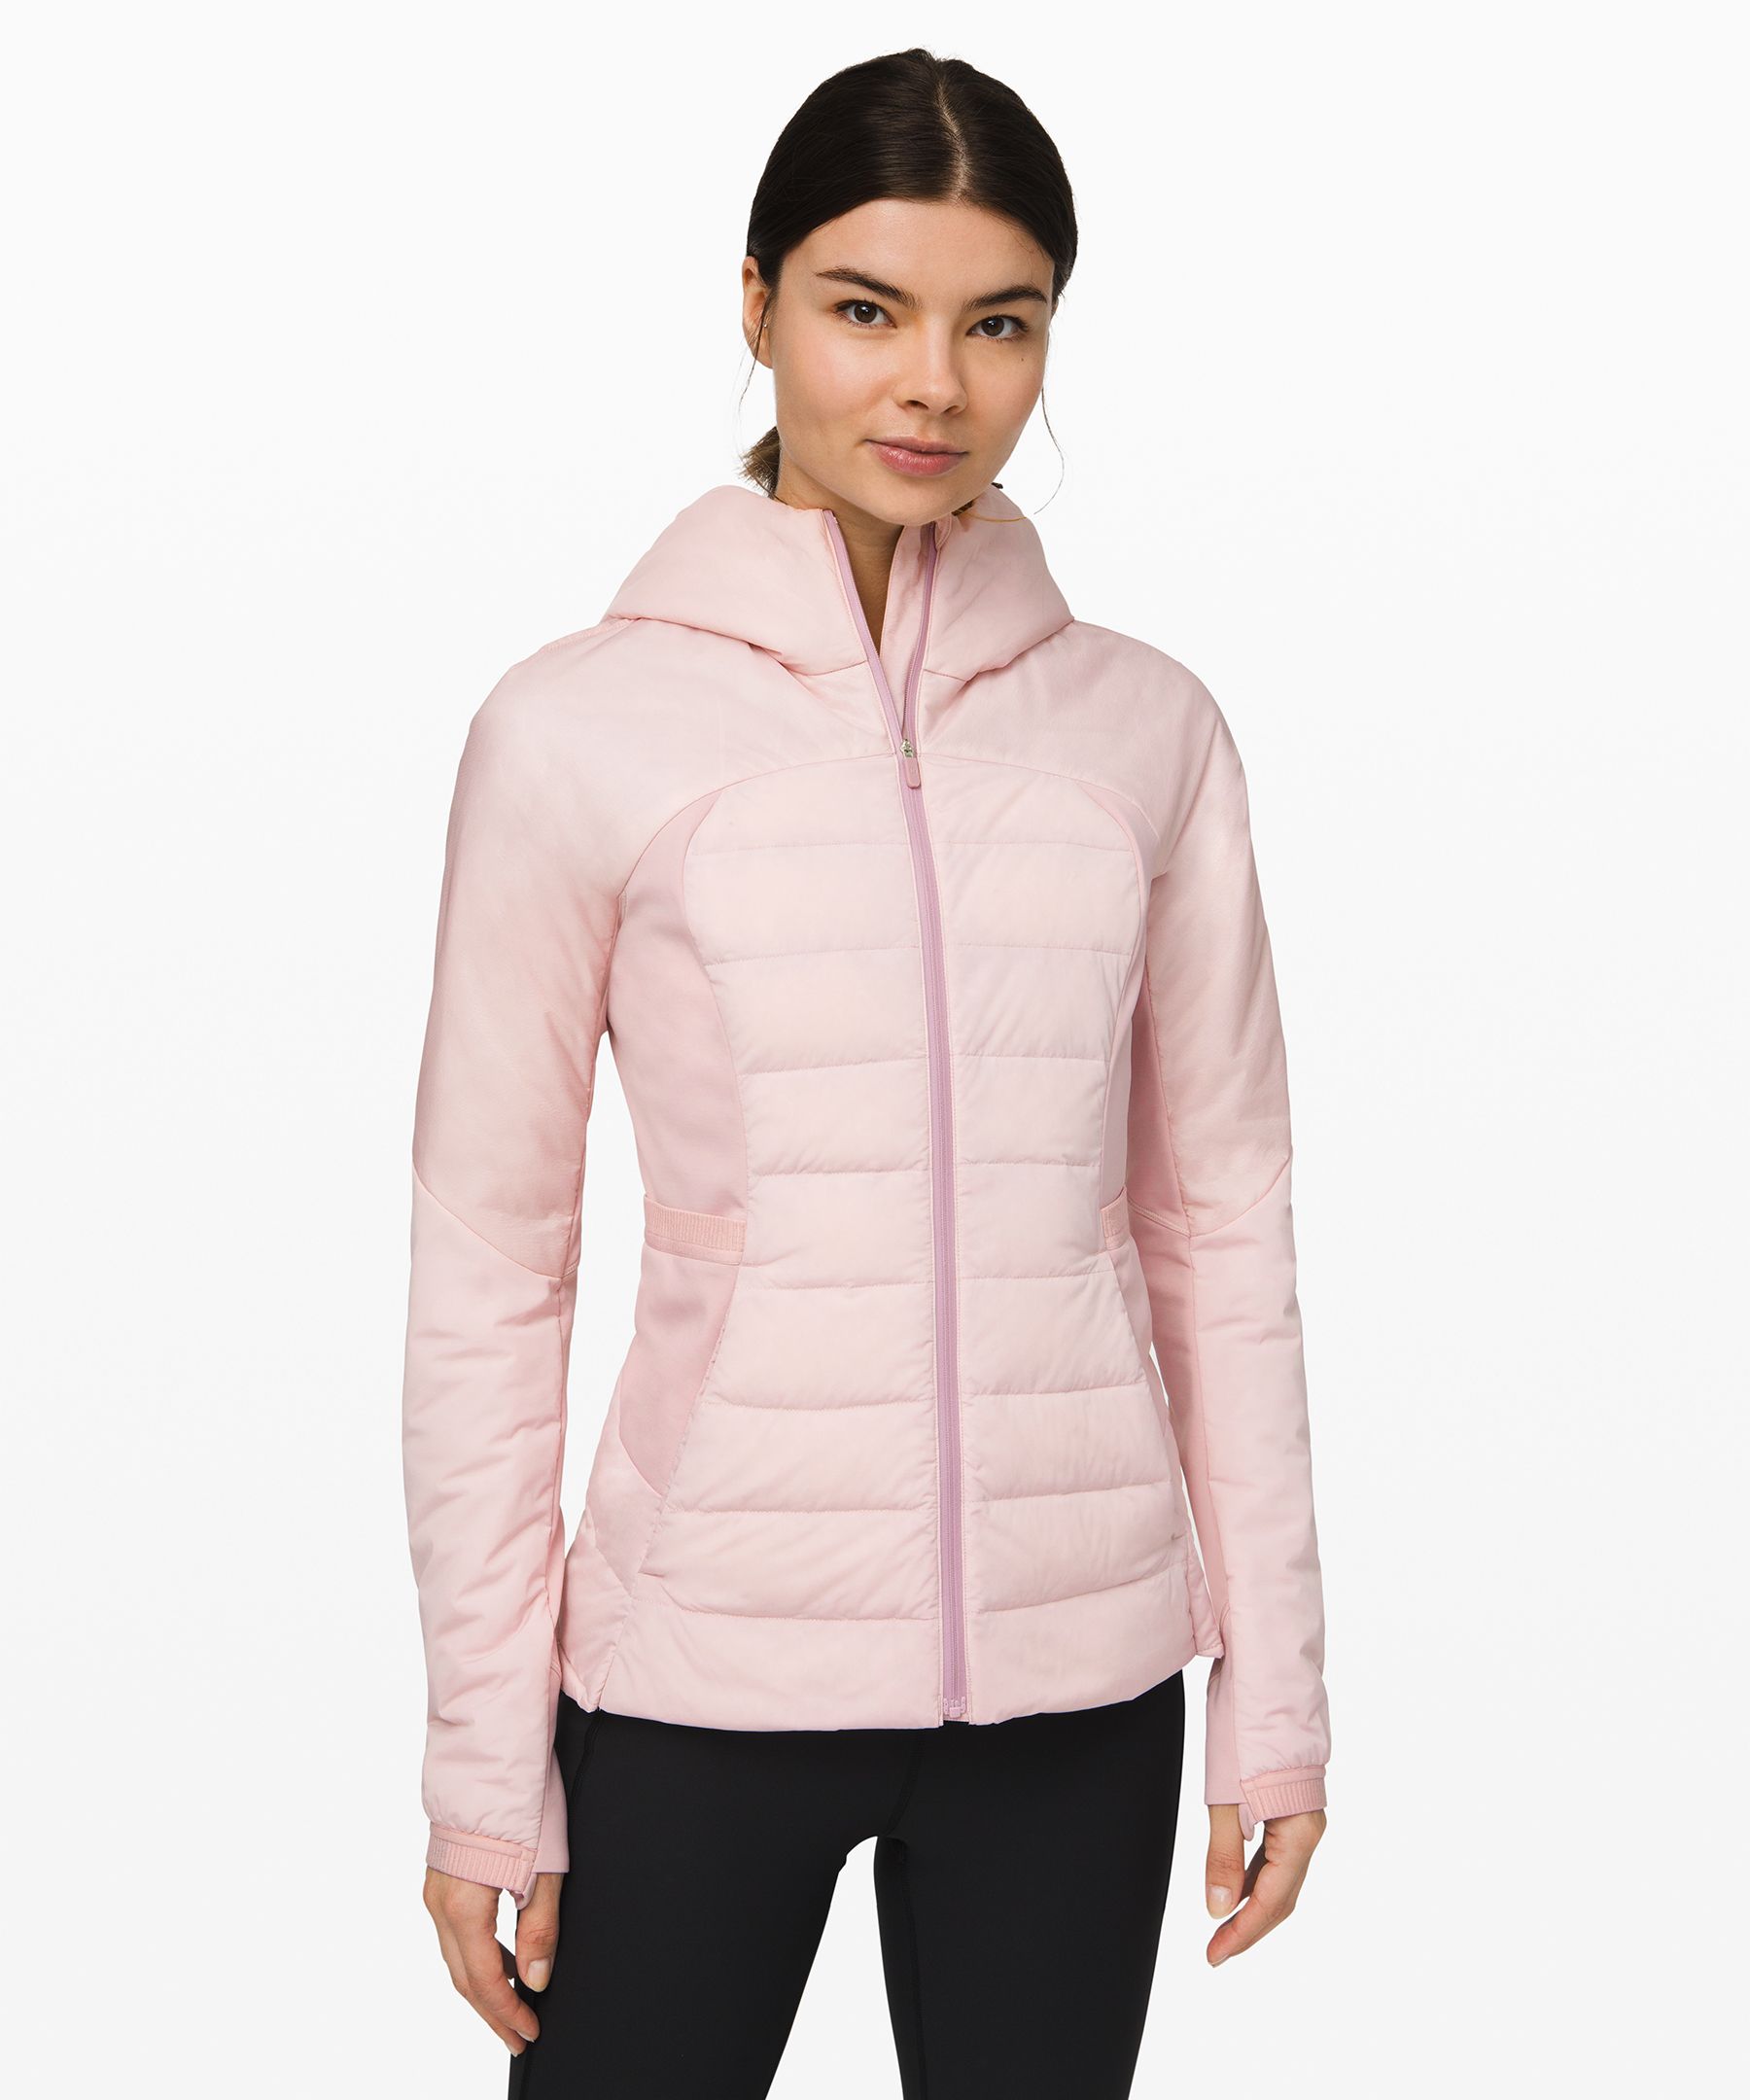 down for it all jacket lululemon